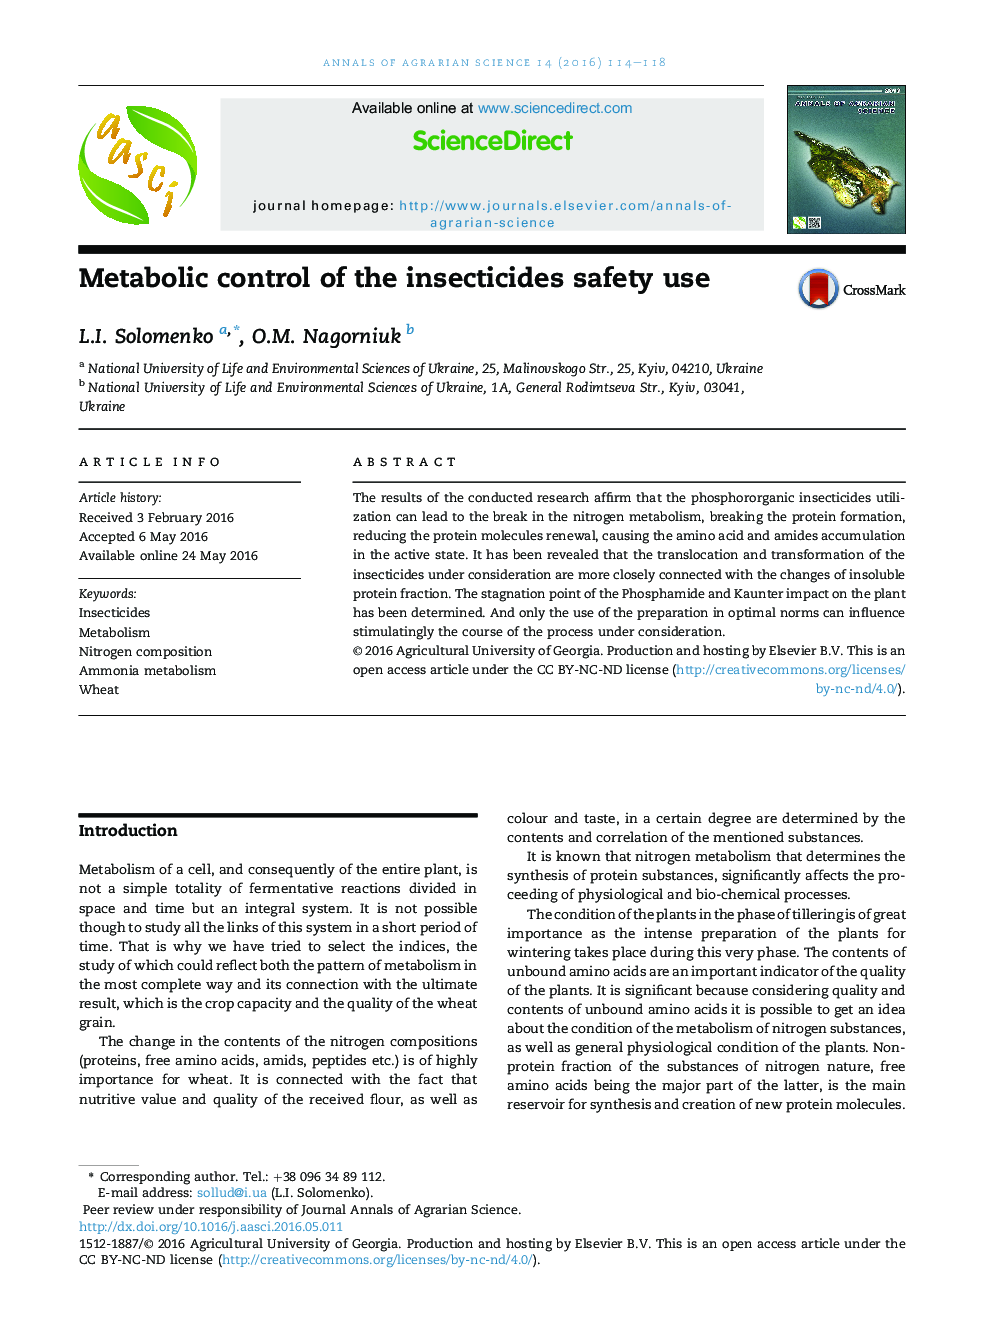 Metabolic control of the insecticides safety use 